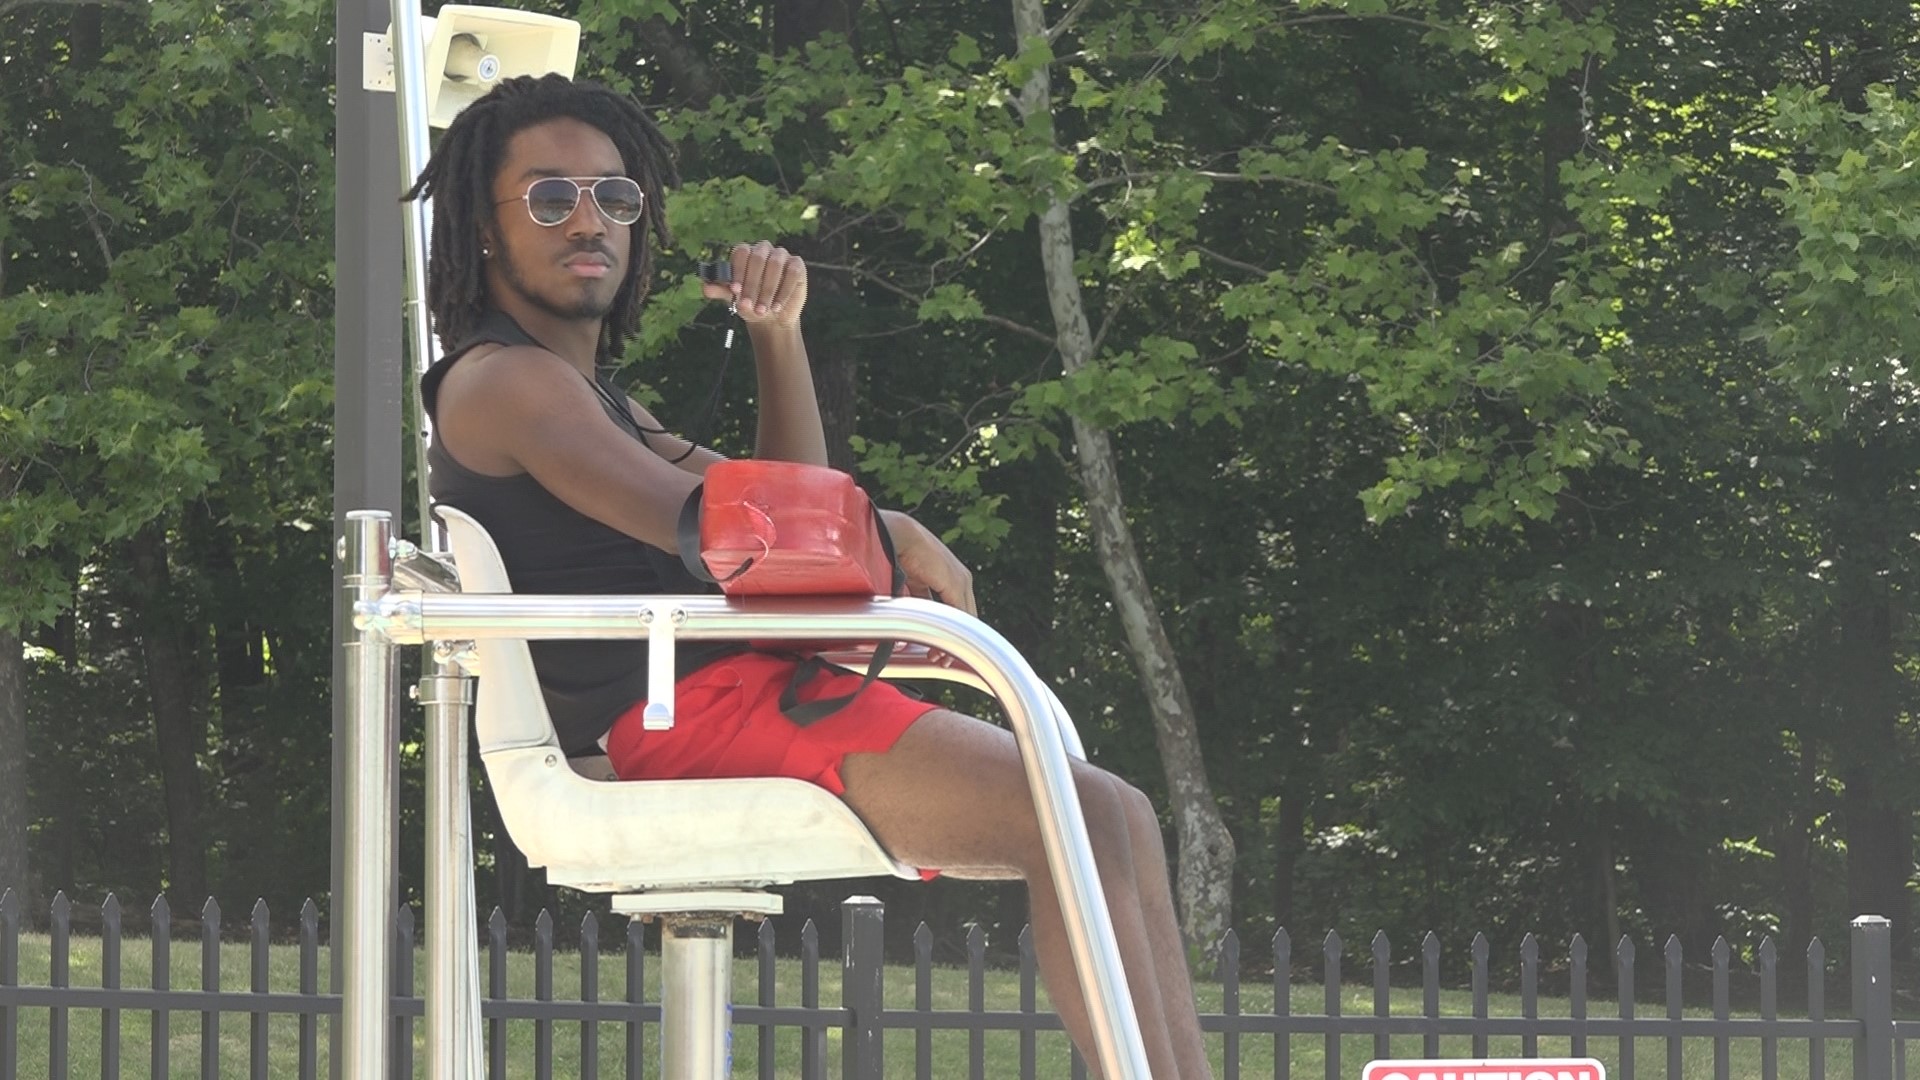 Guilford County opened its three public pools Saturday after a delayed start to the season due to a lifeguard shortage.